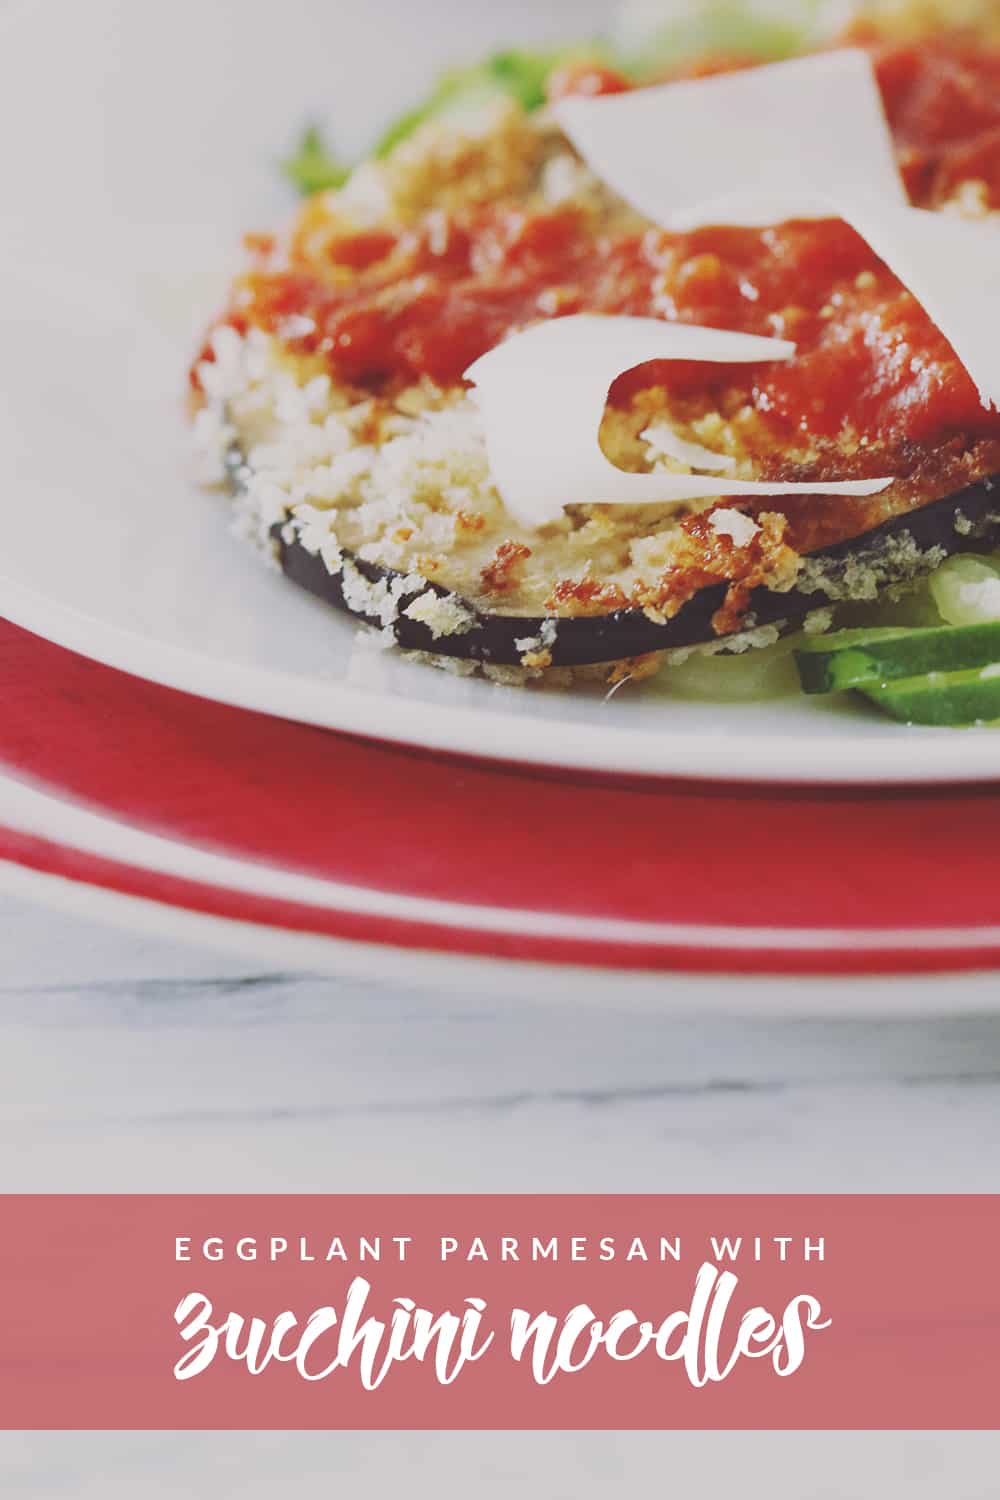 A simple and healthy twist on Eggplant Parmesan with zucchini noodles in place of regular noodles. Easy to make and delicious to eat!